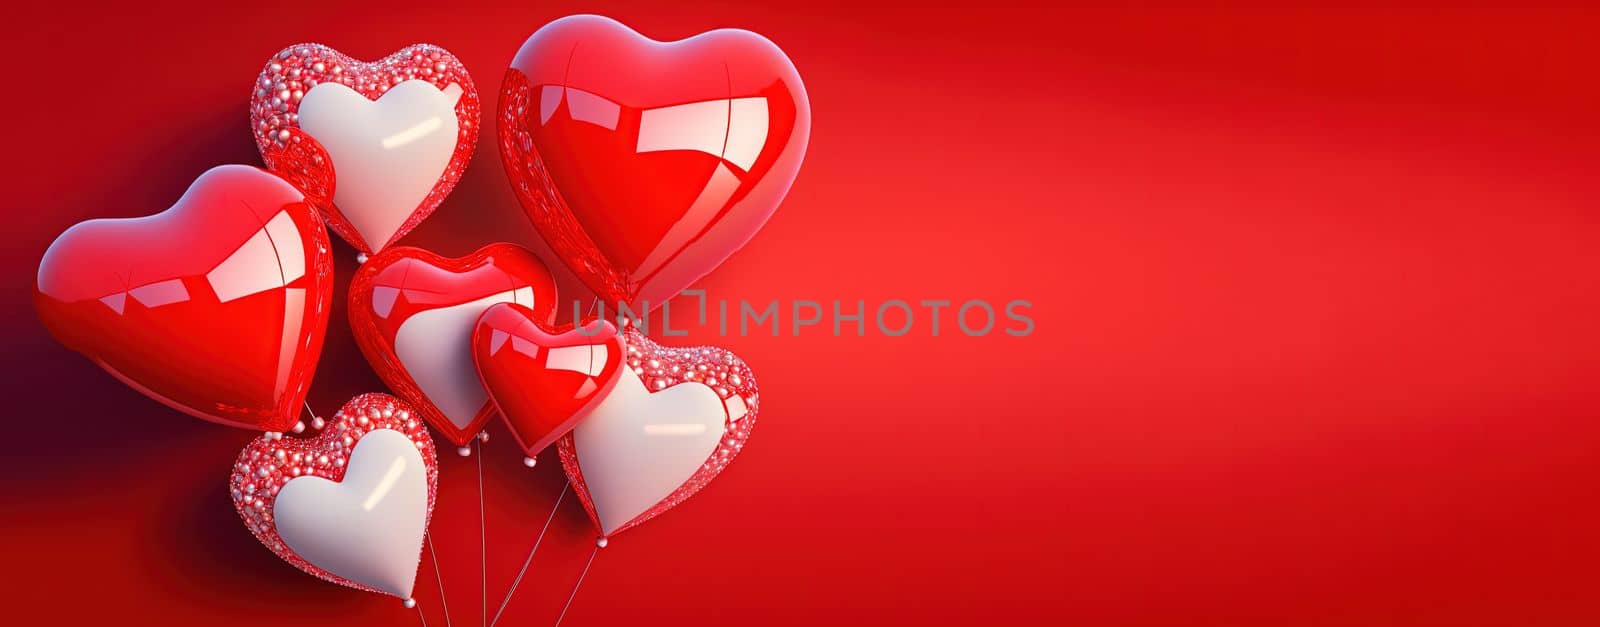 Valentine's Day banner background with a shining red 3D heart by templator